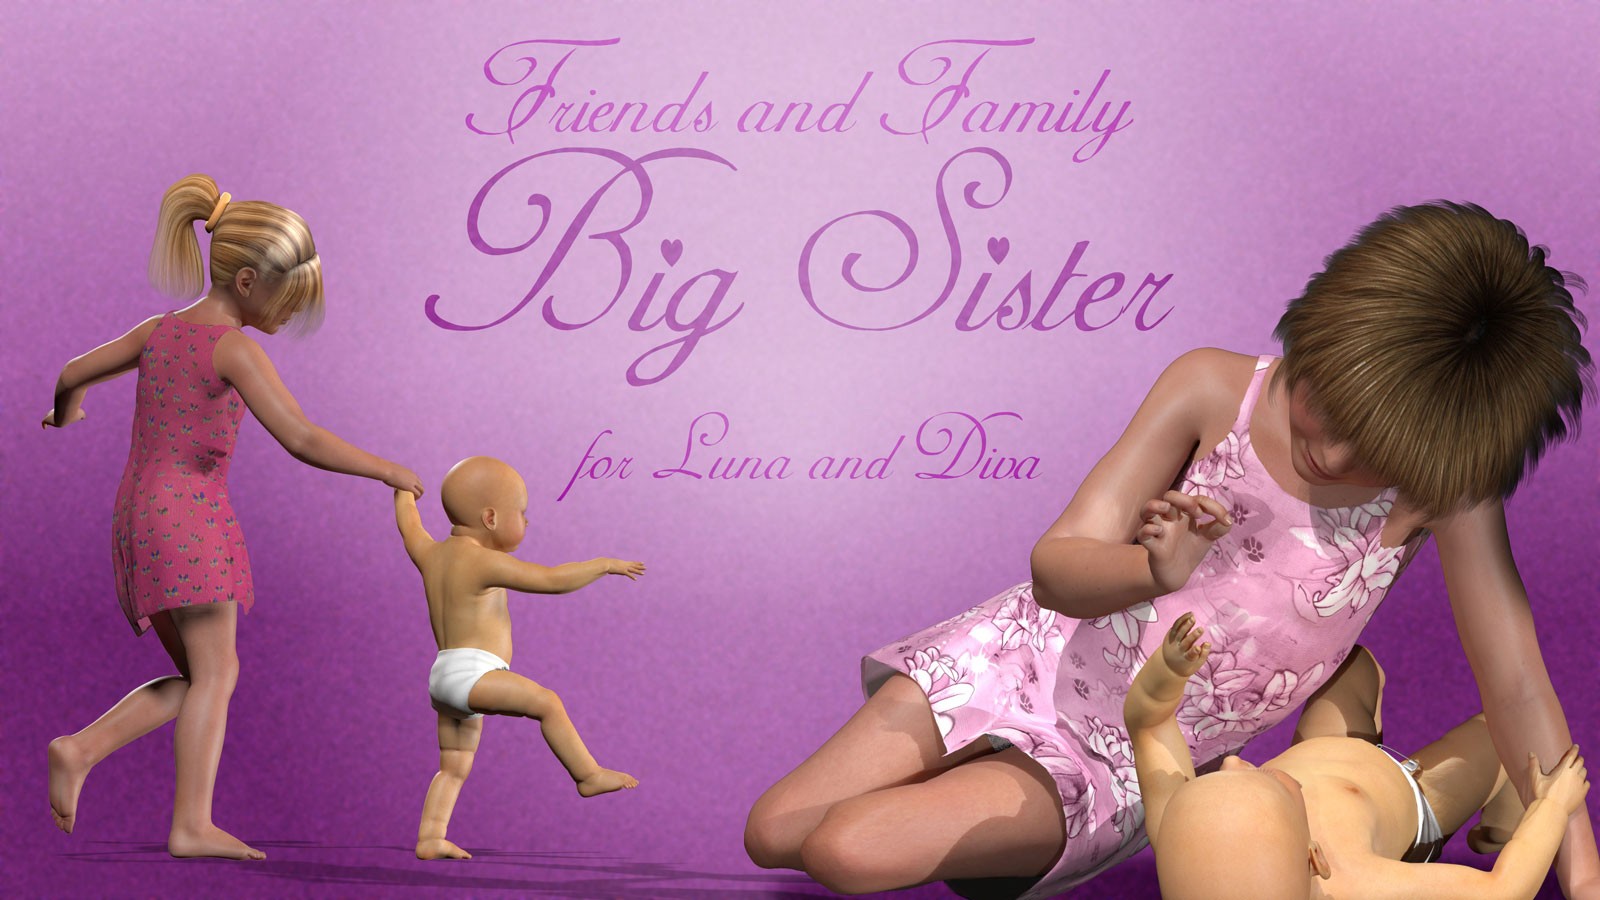 Friends and Family - Big Sister